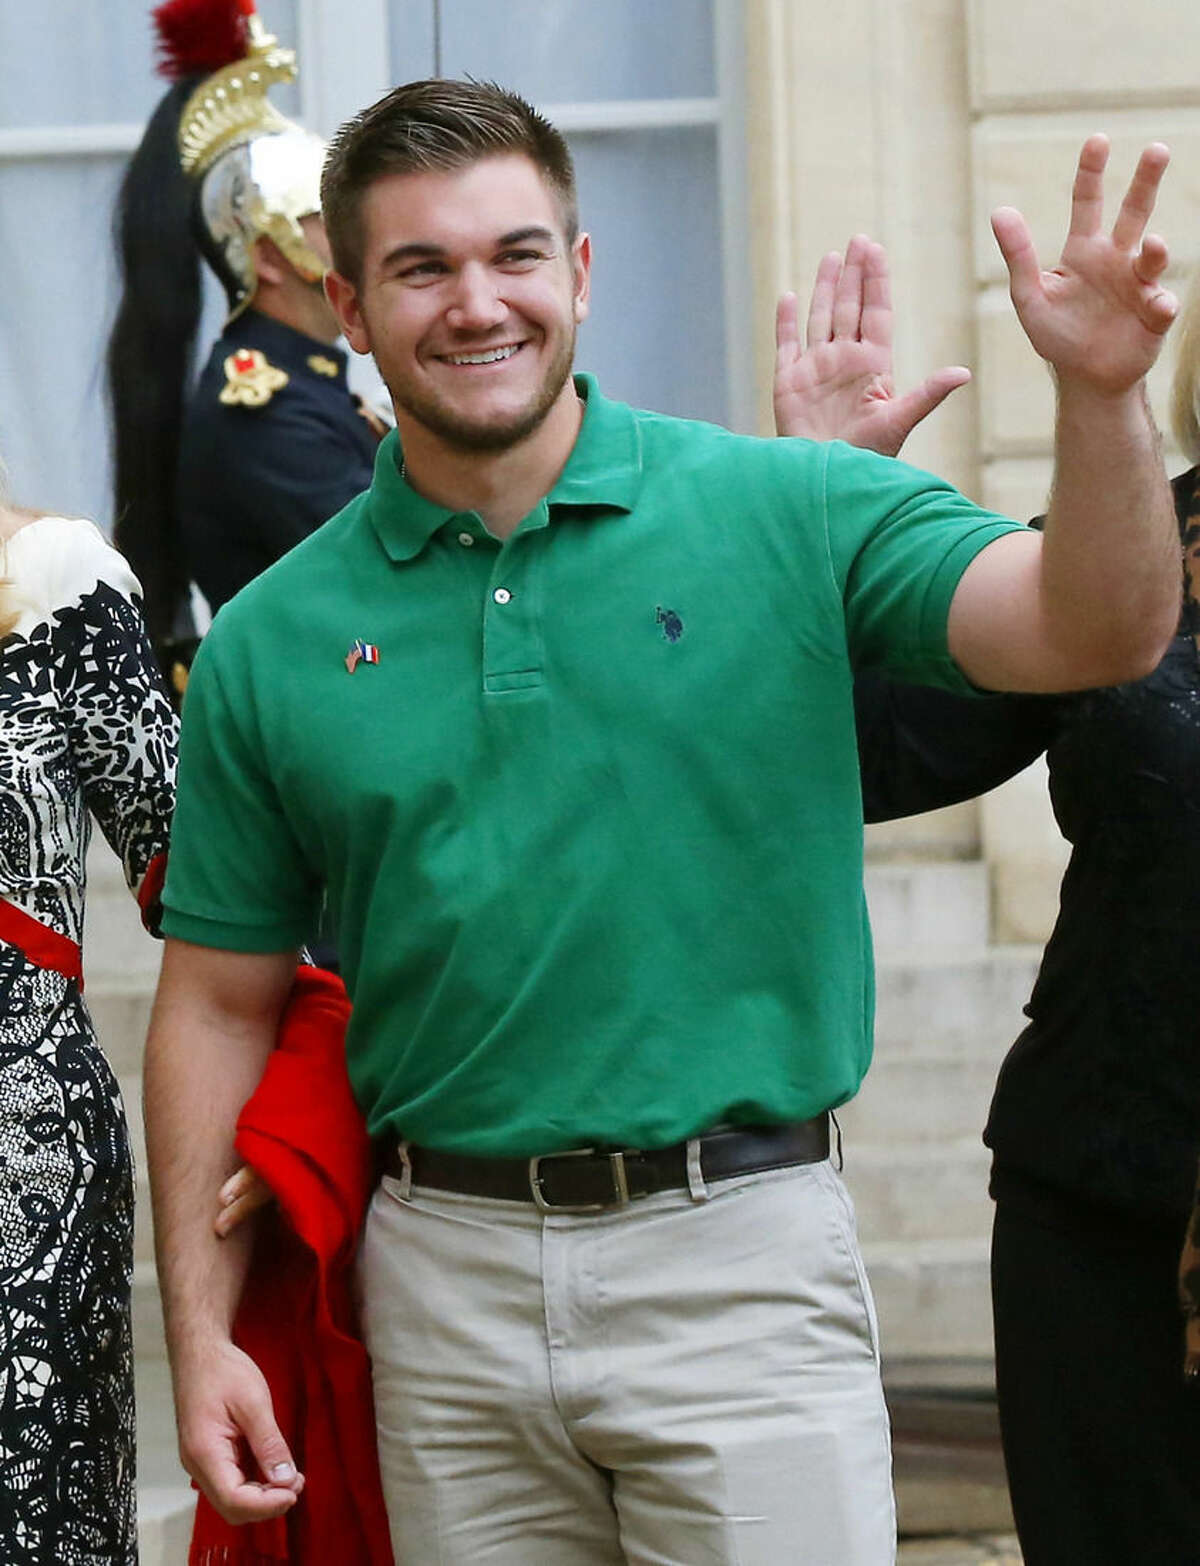 AP Photo/Michel Euler, File In this Aug. 24, file photo, Alek Skarlatos arrives at the Elysee Palace in Paris, France.